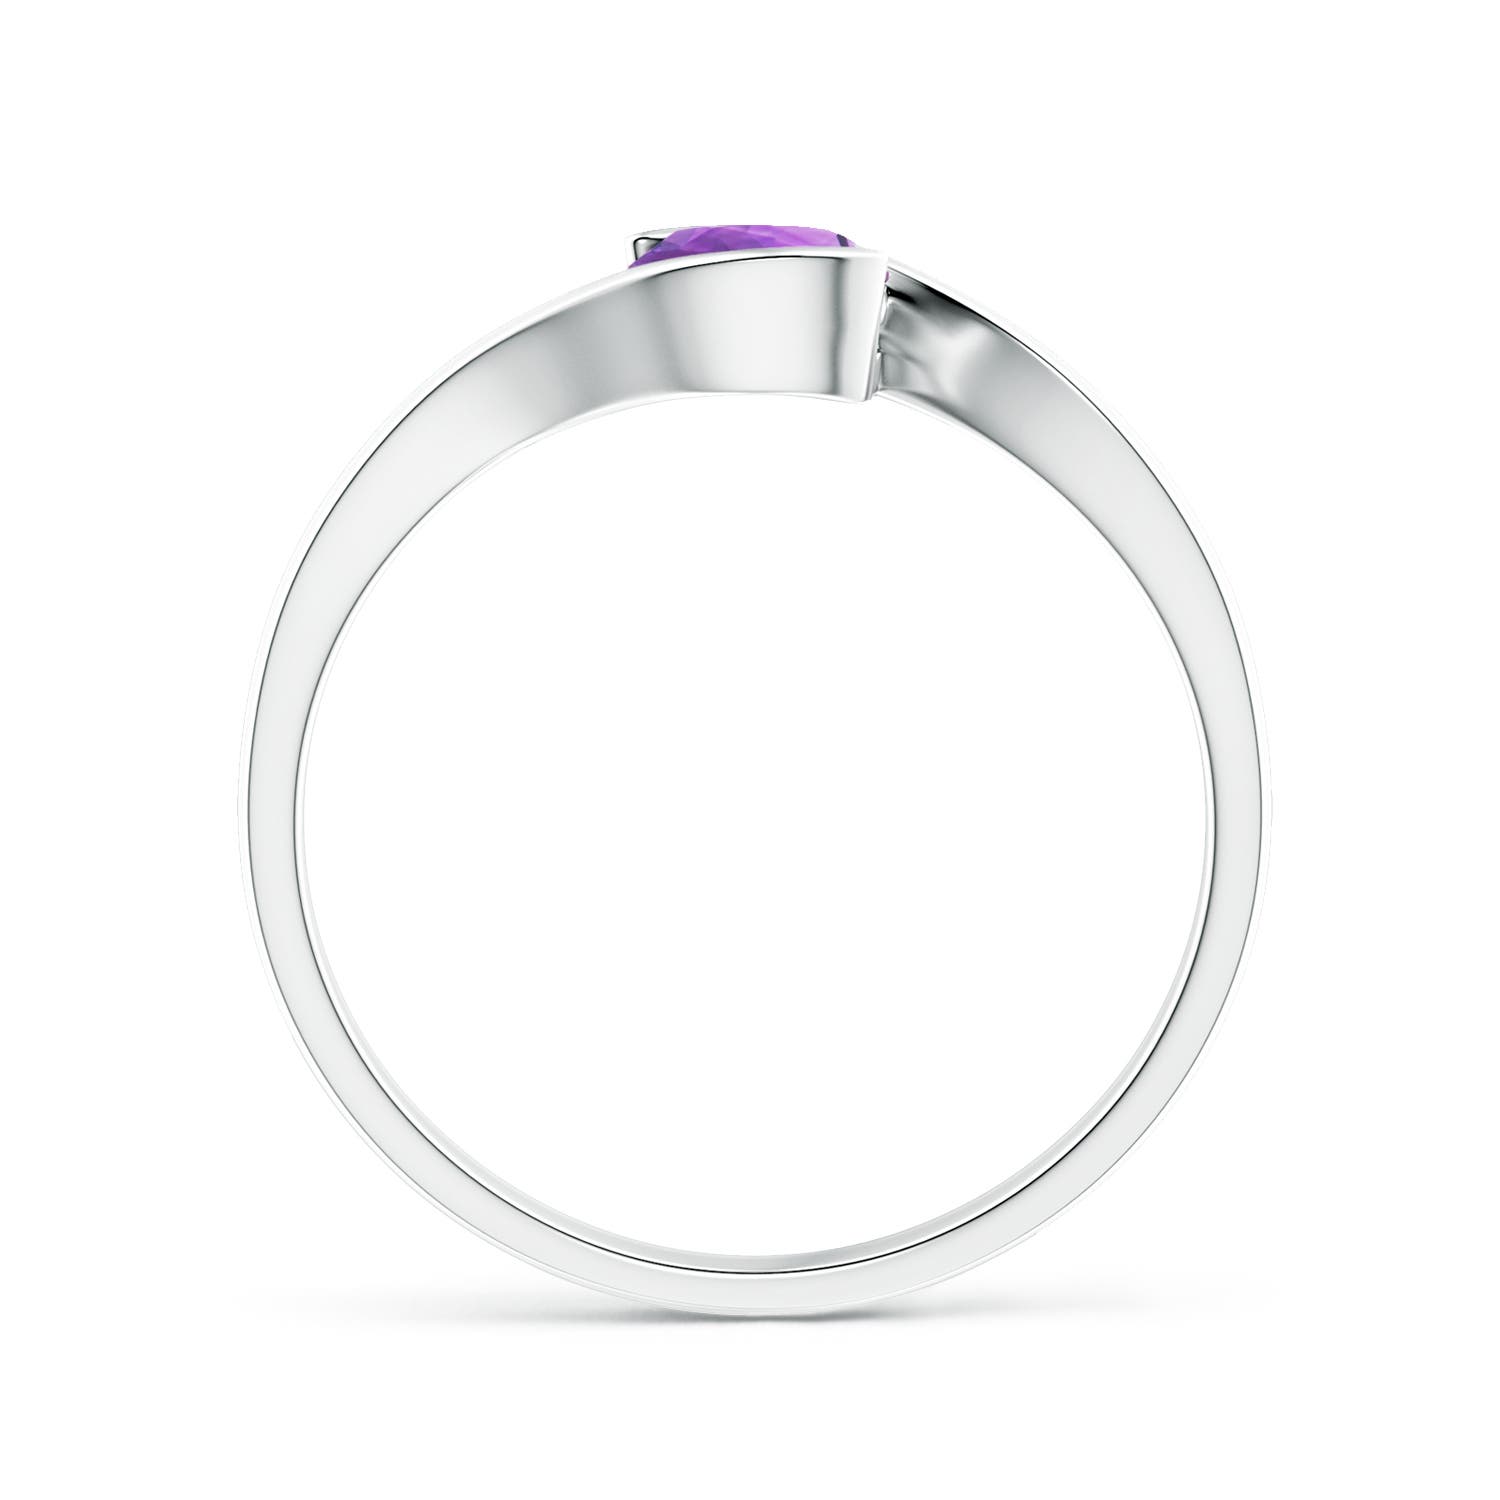 AA - Amethyst / 0.45 CT / 14 KT White Gold